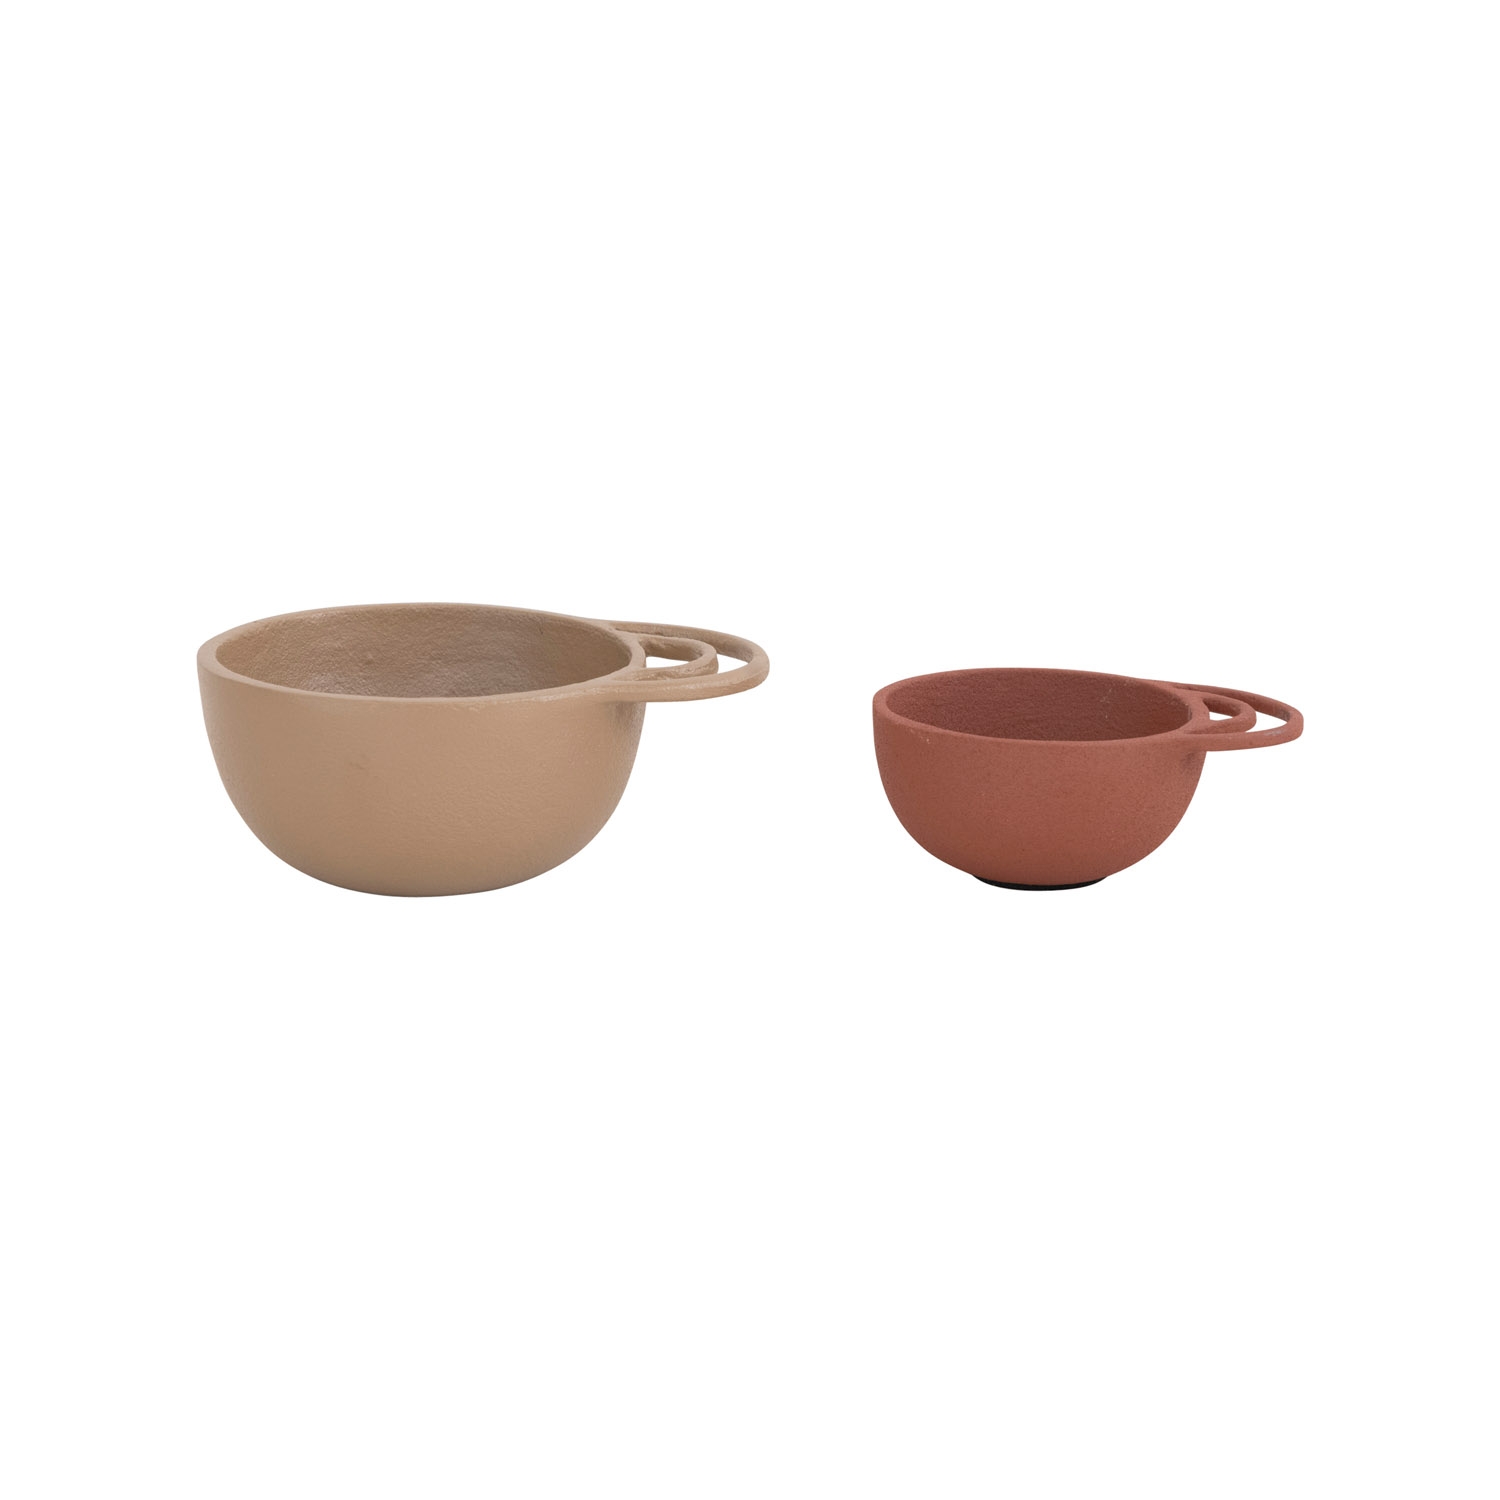 Decorative Textured Metal Bowls with Handles, 2 Colors, Set of 2 - Image 0